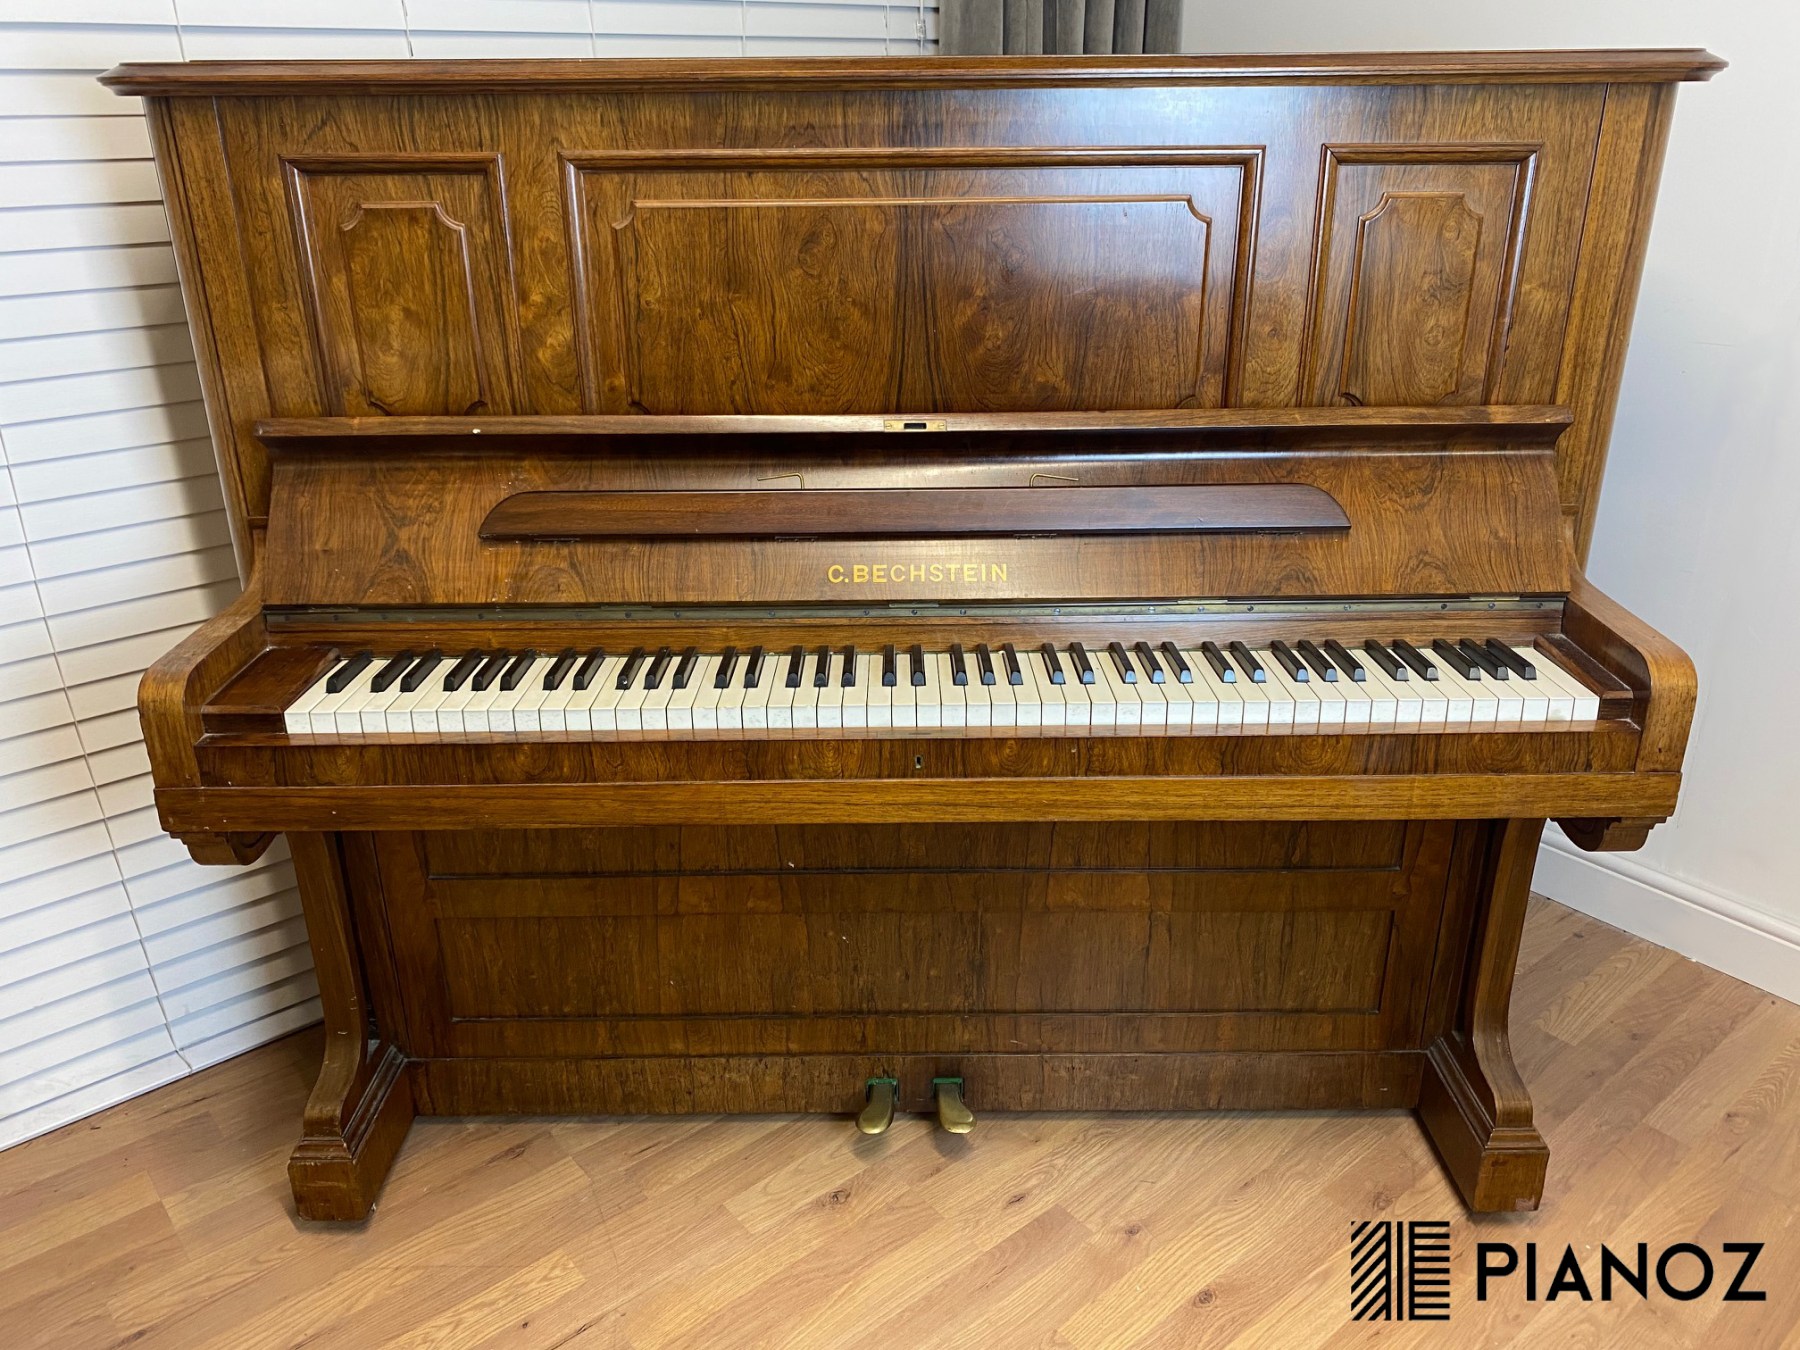 C. Bechstein Concert 8 Upright Piano piano for sale in UK